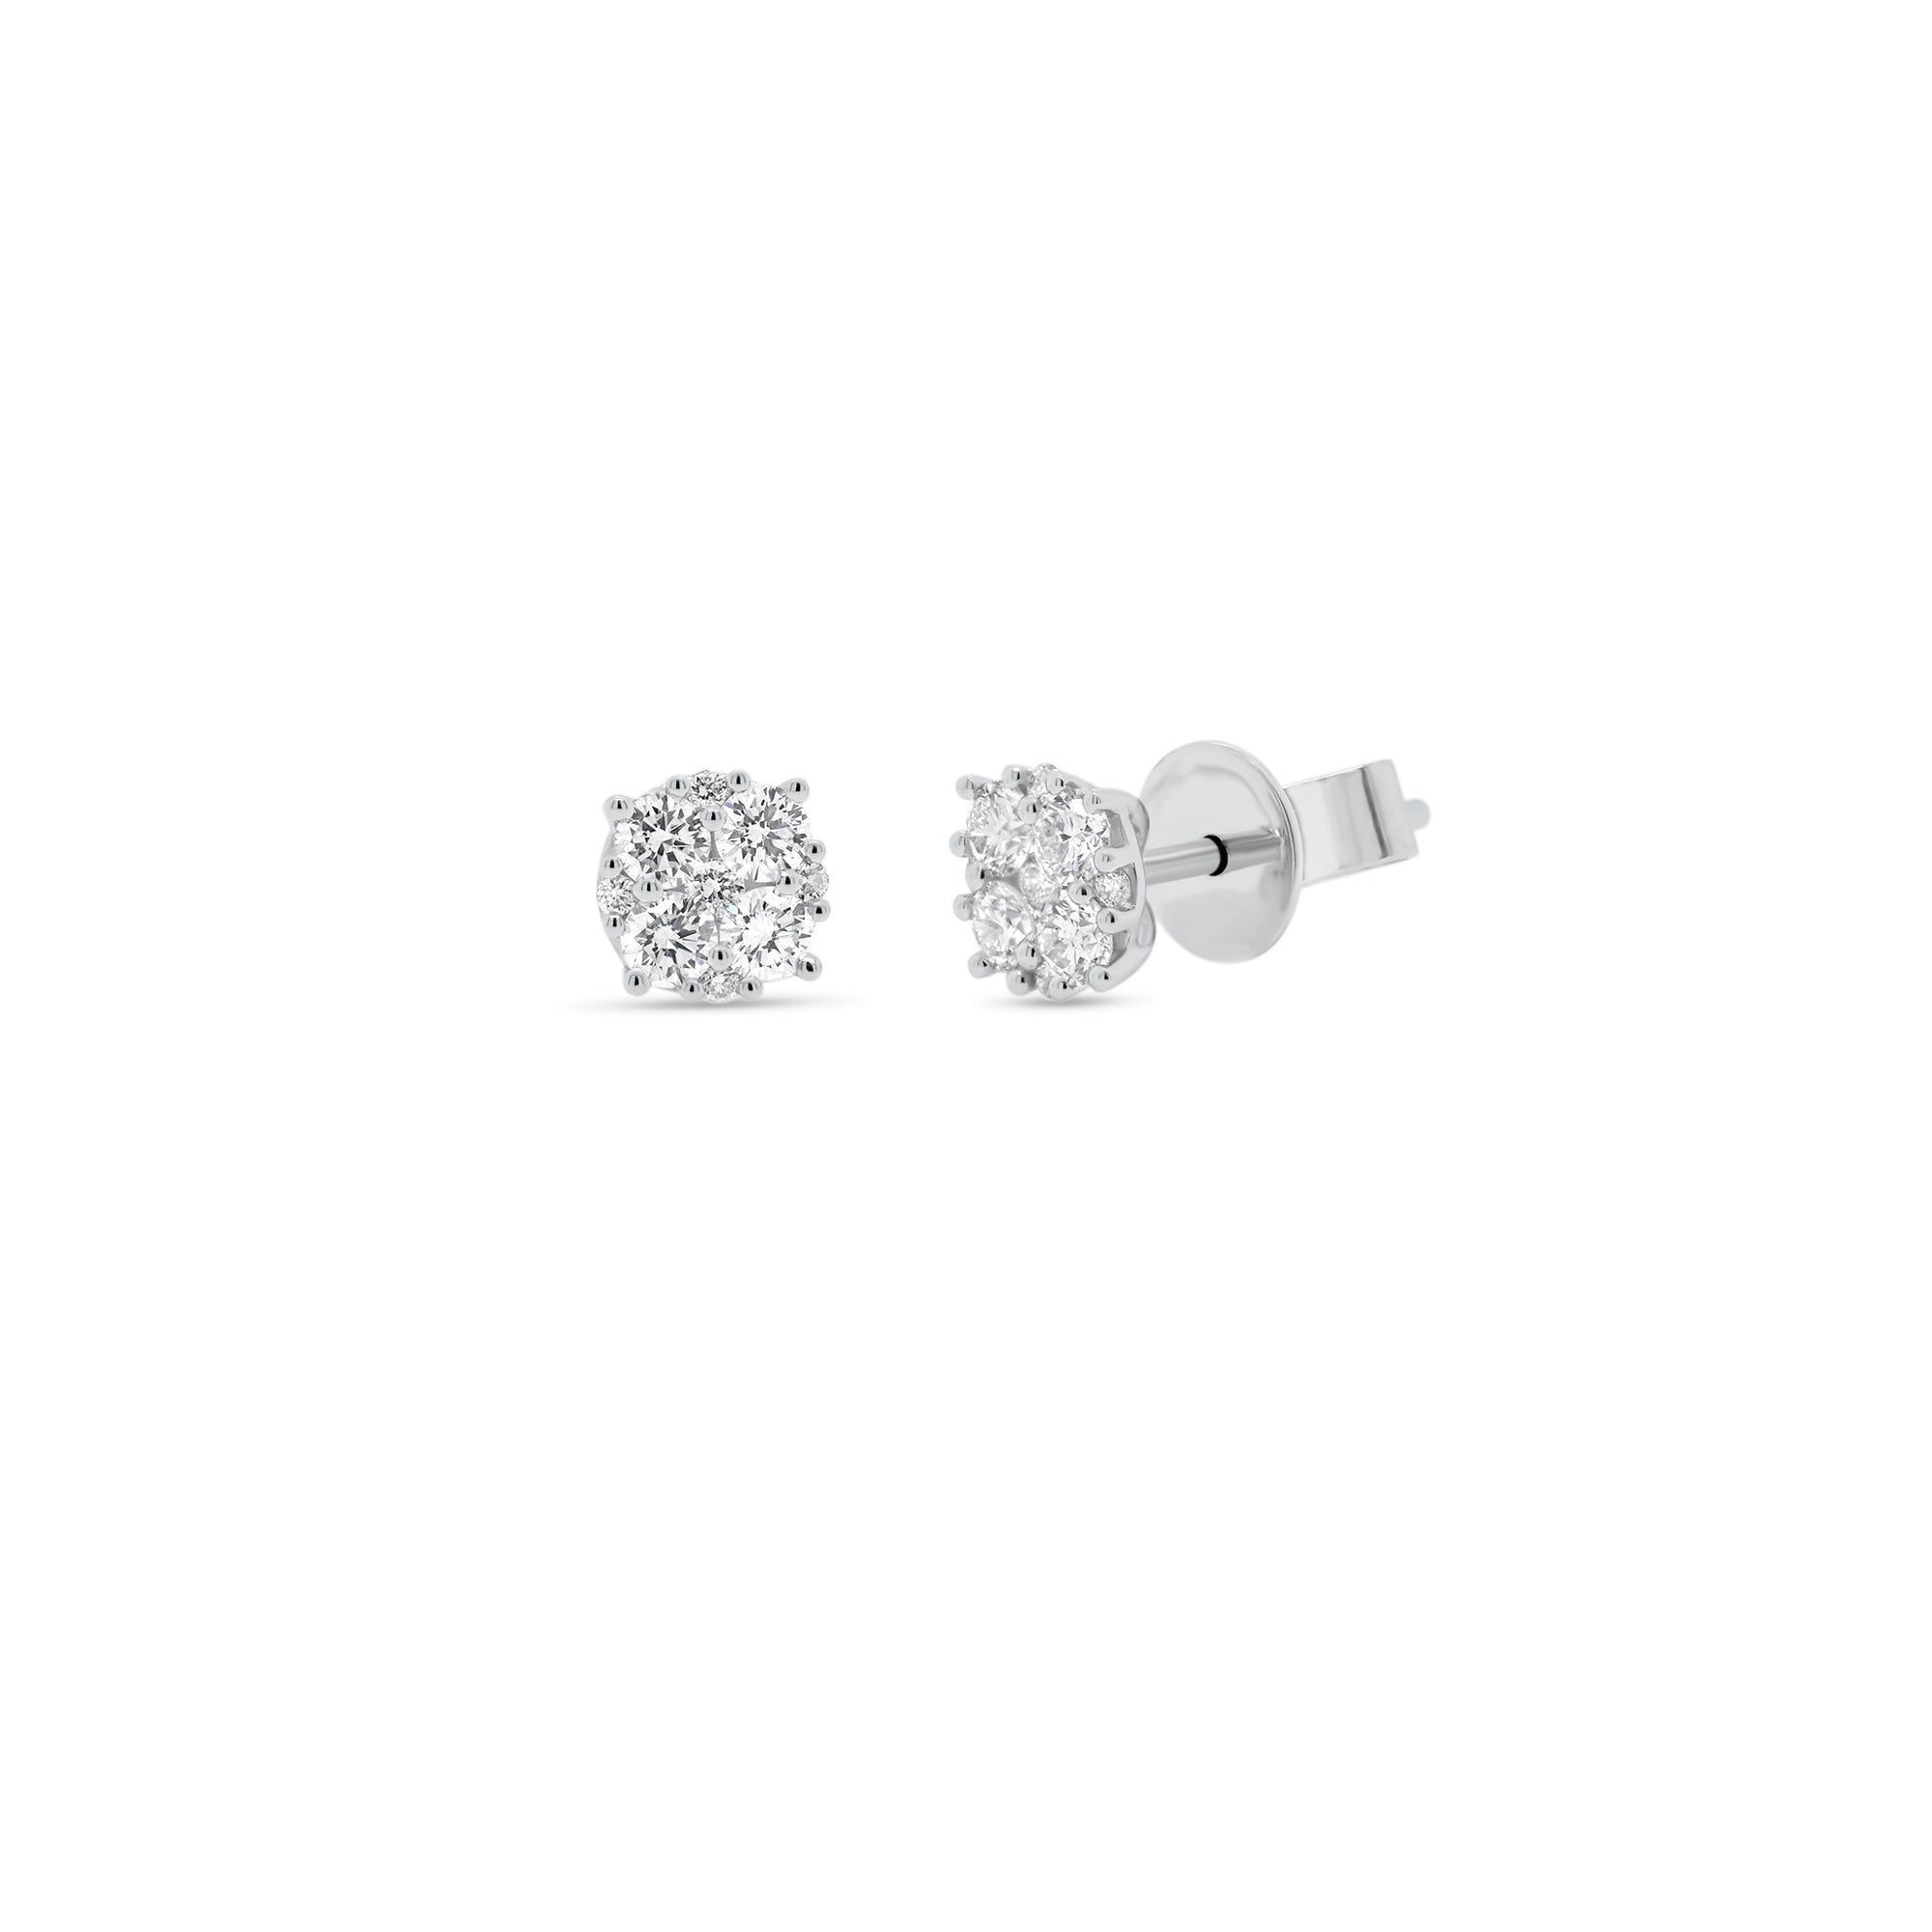 Small Diamond Cluster Stud Earrings - 18K white gold weighing 1.37 grams - 18 round diamonds totaling 0.42 carats